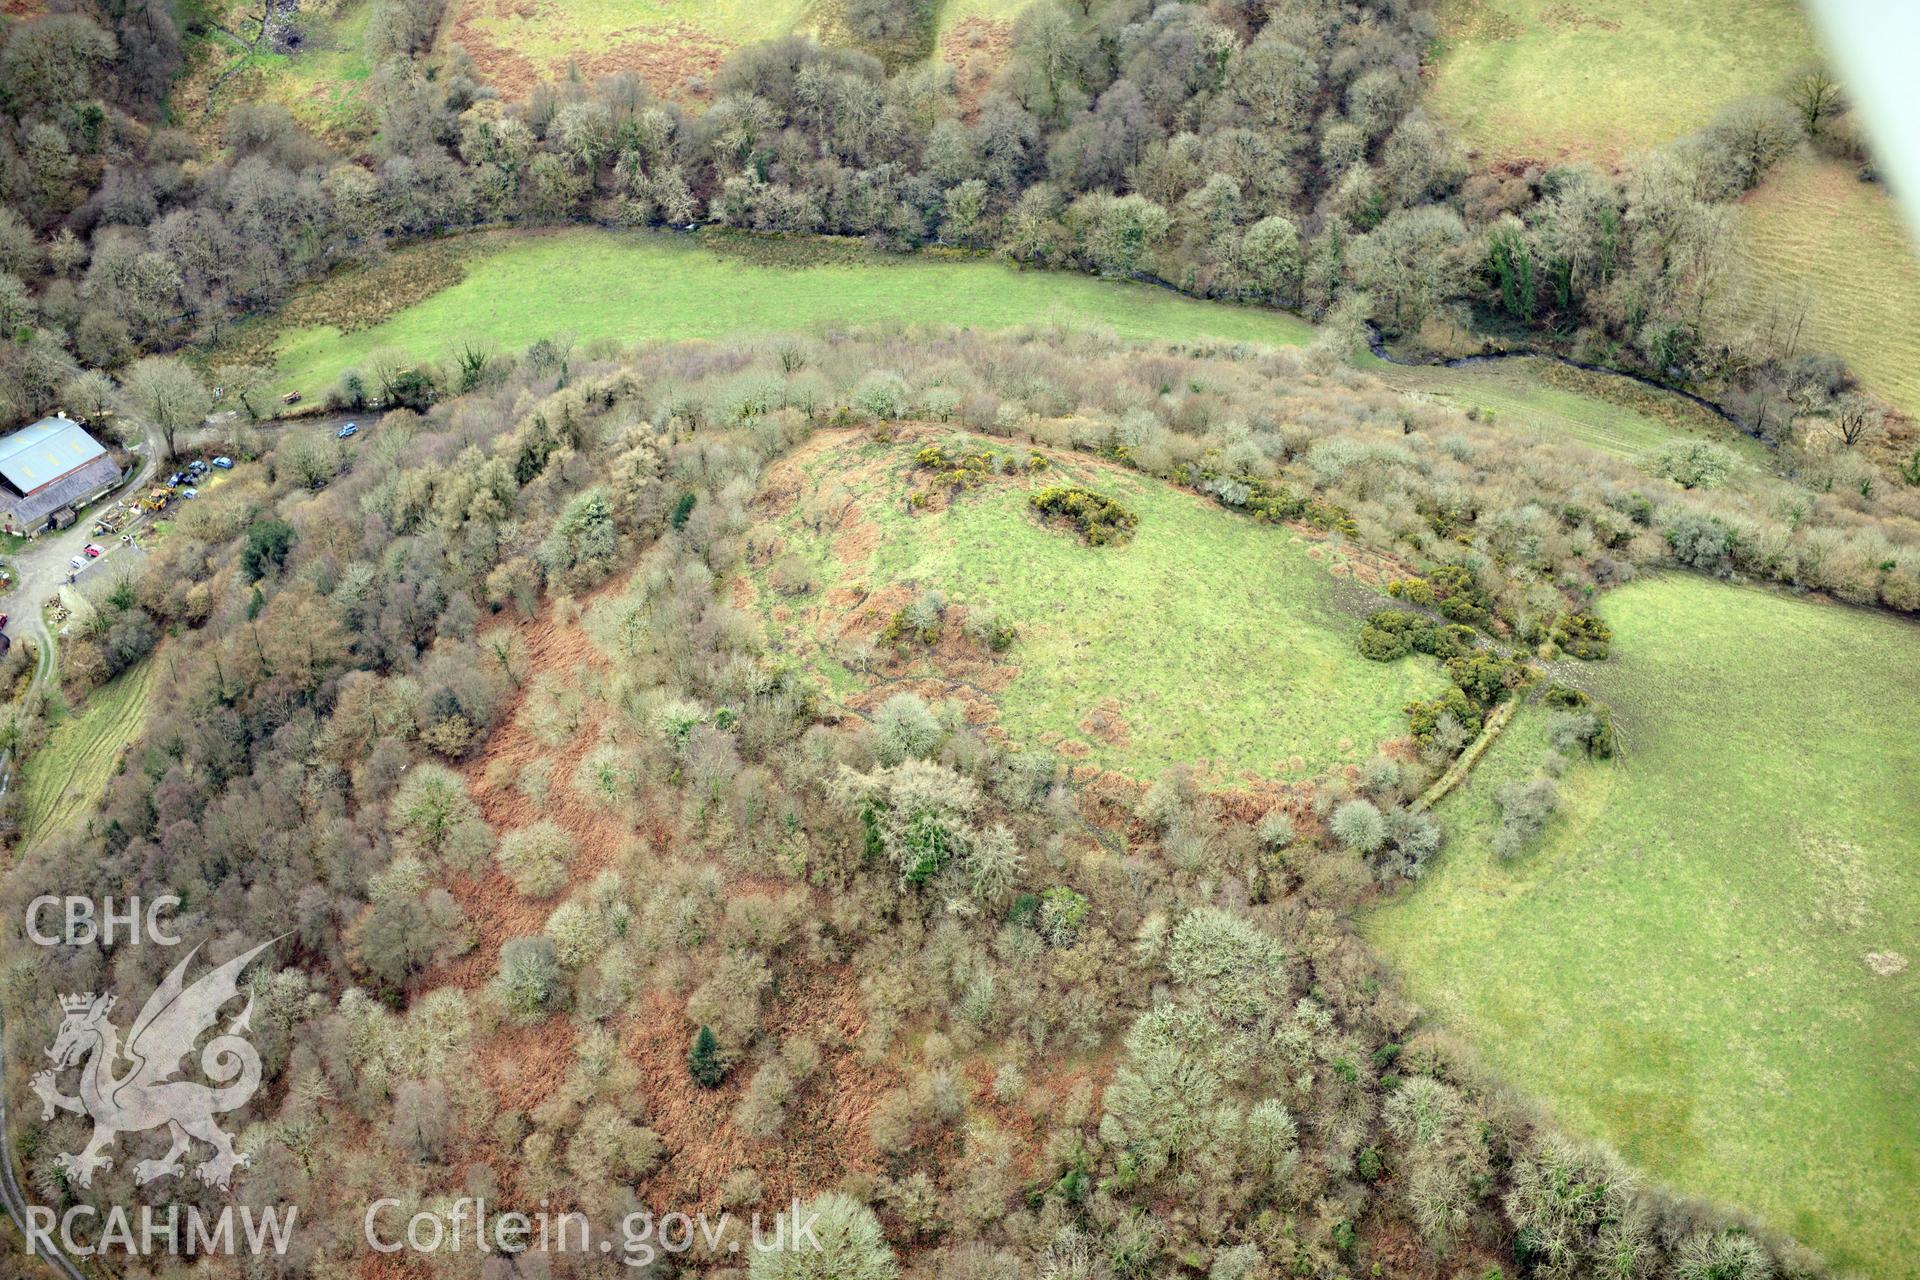 Dinas Cerdin hillfort, near Ffostrasol, Cardigan. Oblique aerial photograph taken during the Royal Commission's programme of archaeological aerial reconnaissance by Toby Driver on 13th March 2015.